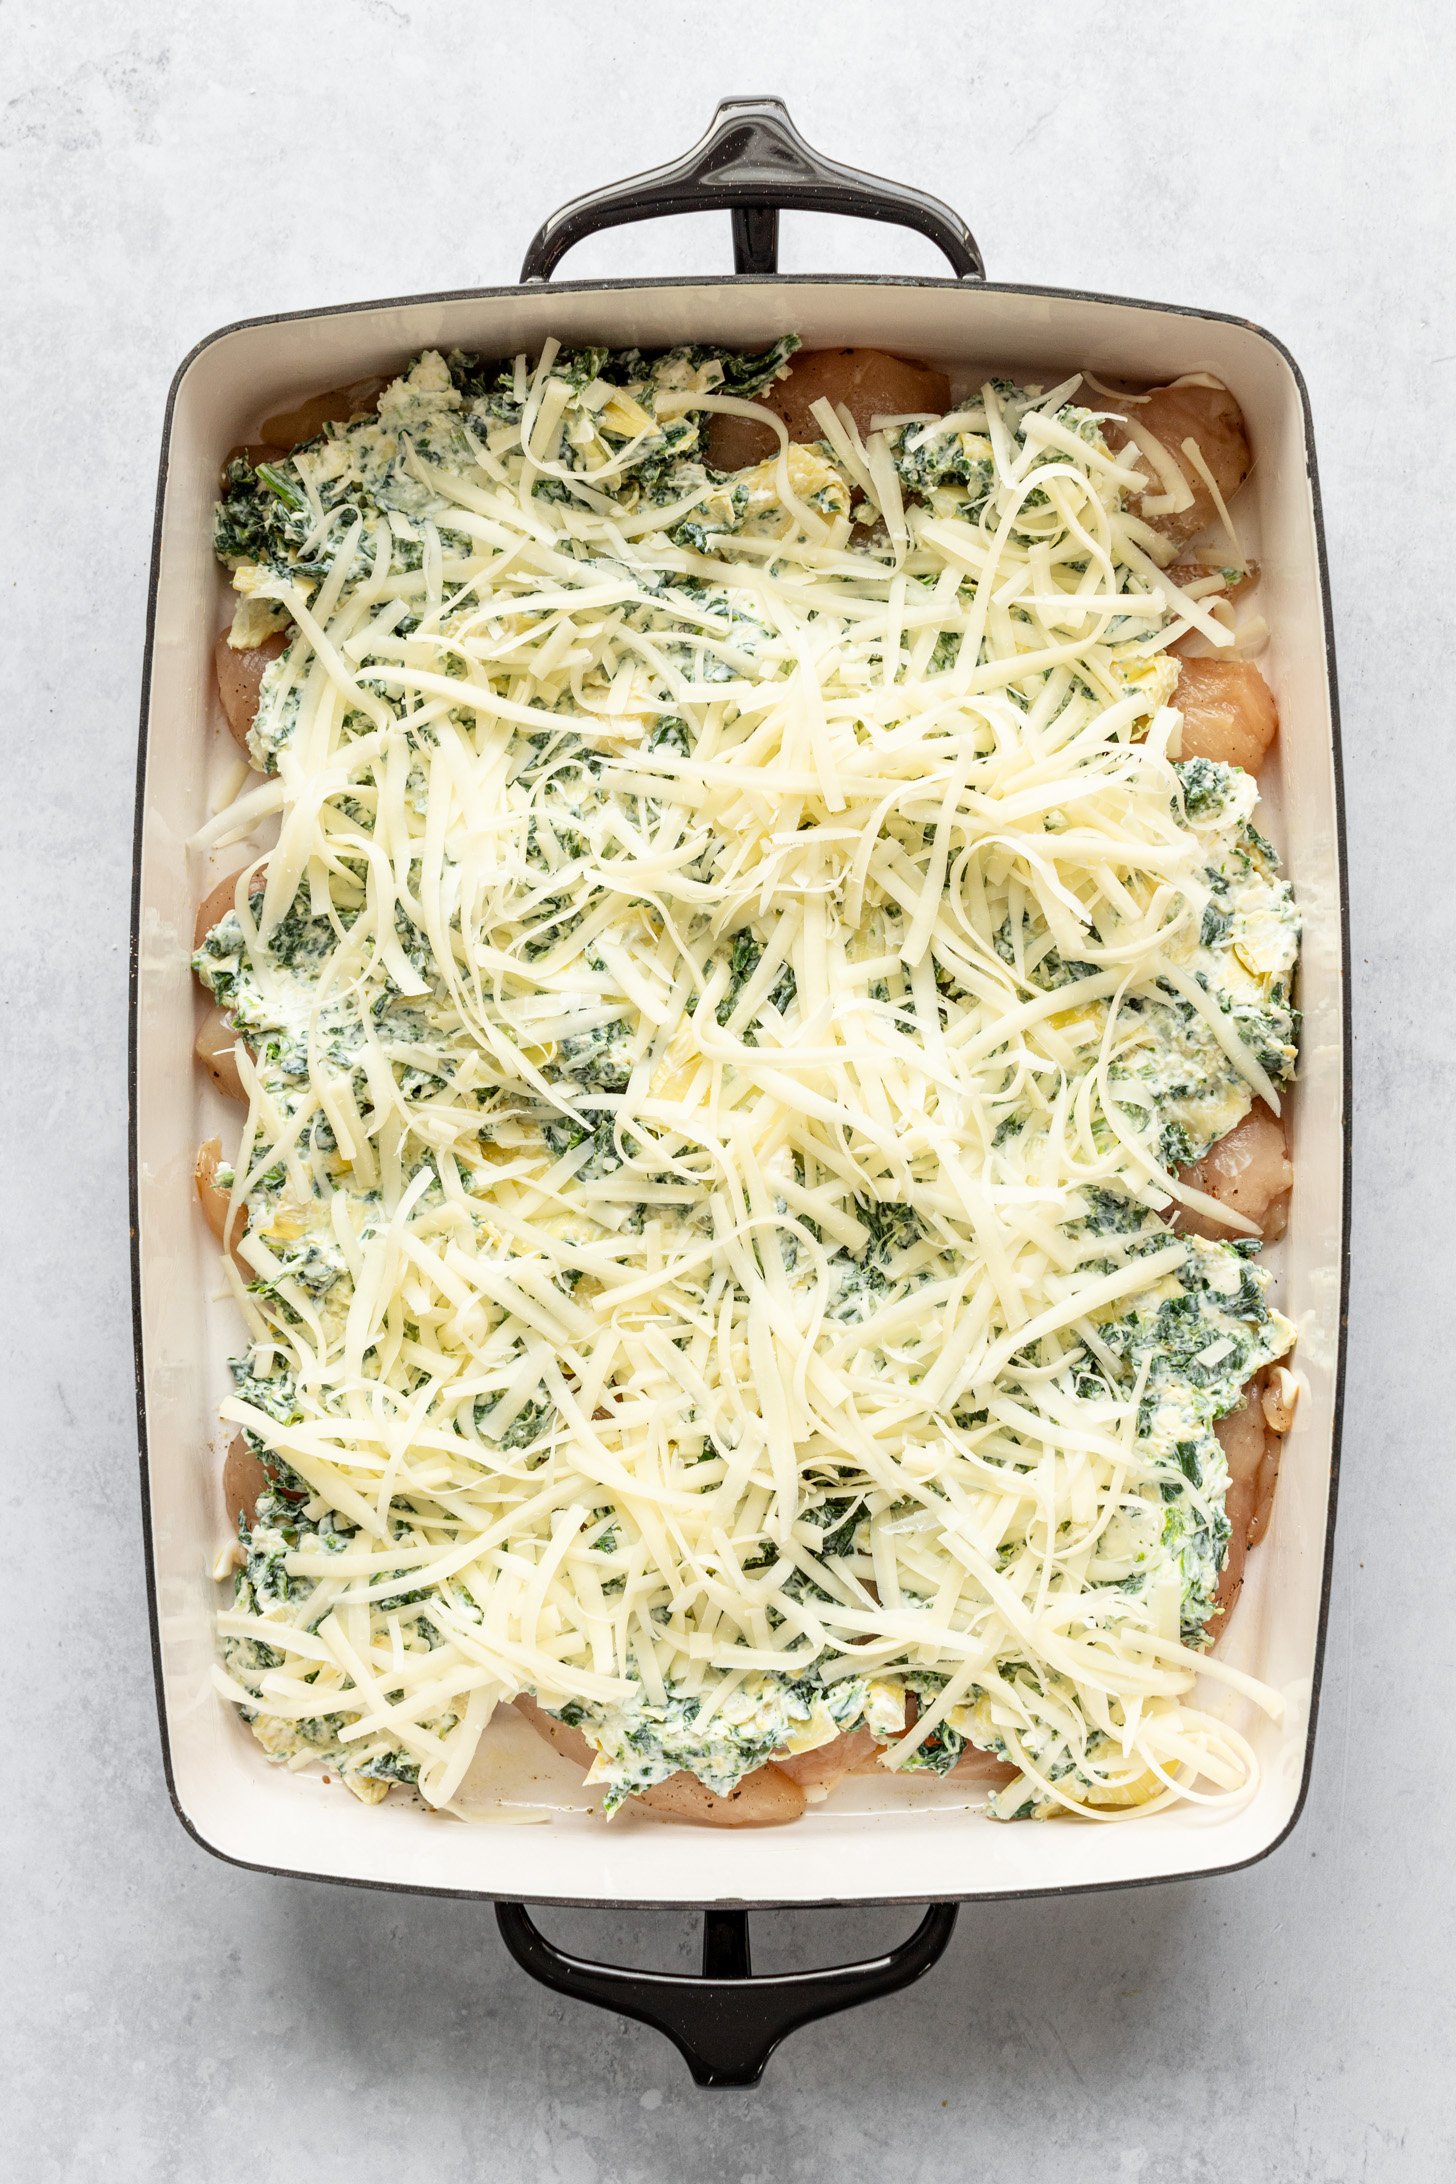 A casserole dish filled with raw chcken breasts topped with a layer of cream cheese mixture and a layer of shredded Parmesan cheese on top. Casserole dish is sitting on a countertop.